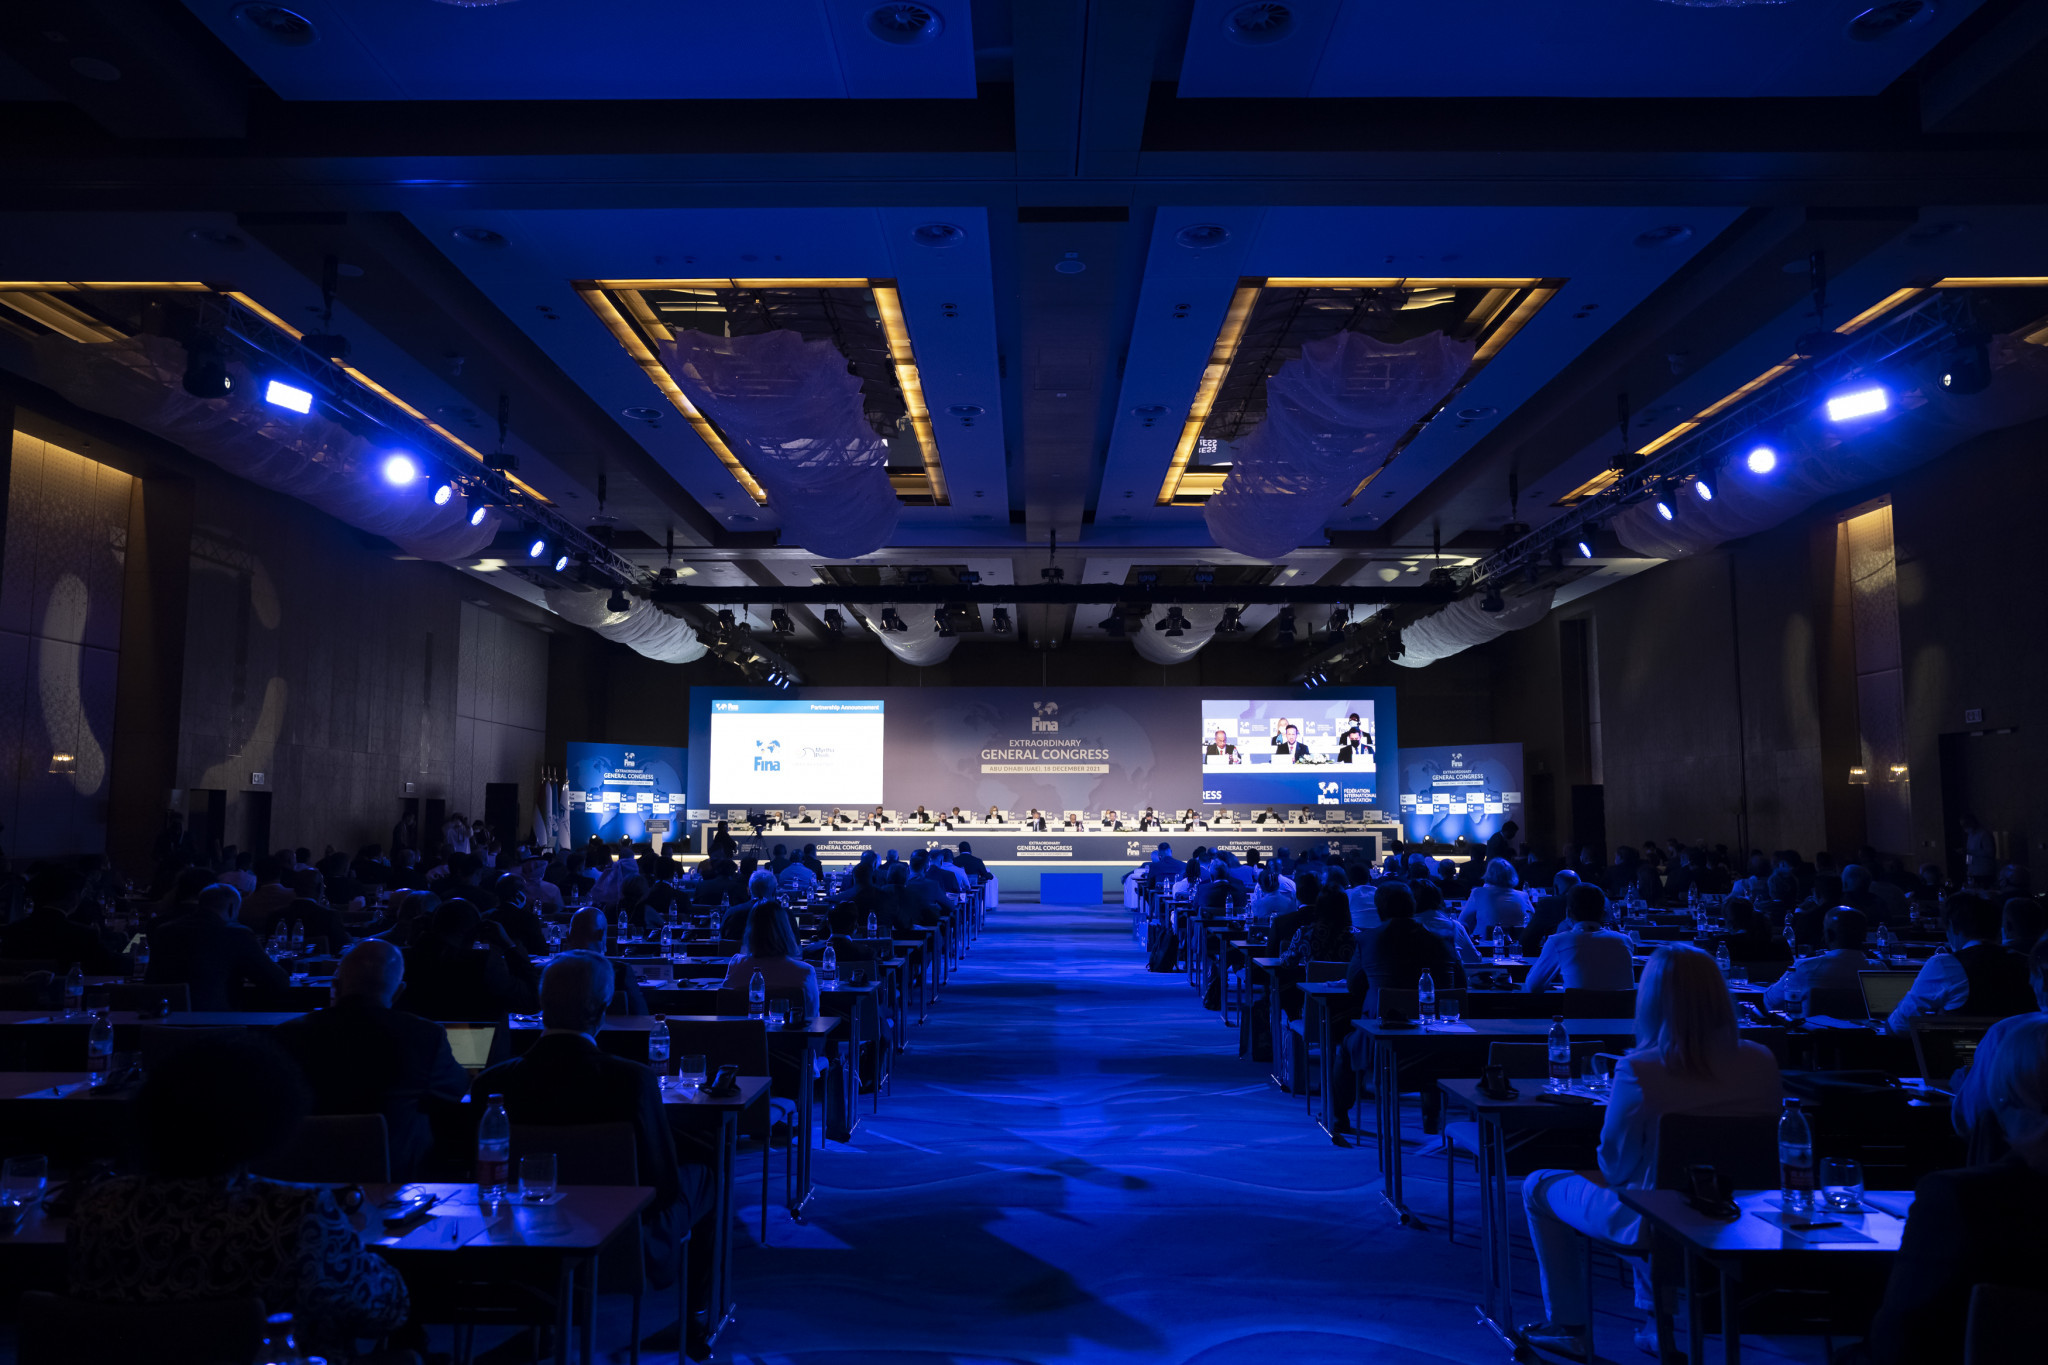 Abu Dhabi in the United Arab Emirates played host to the Extraordinary General Congress ©FINA